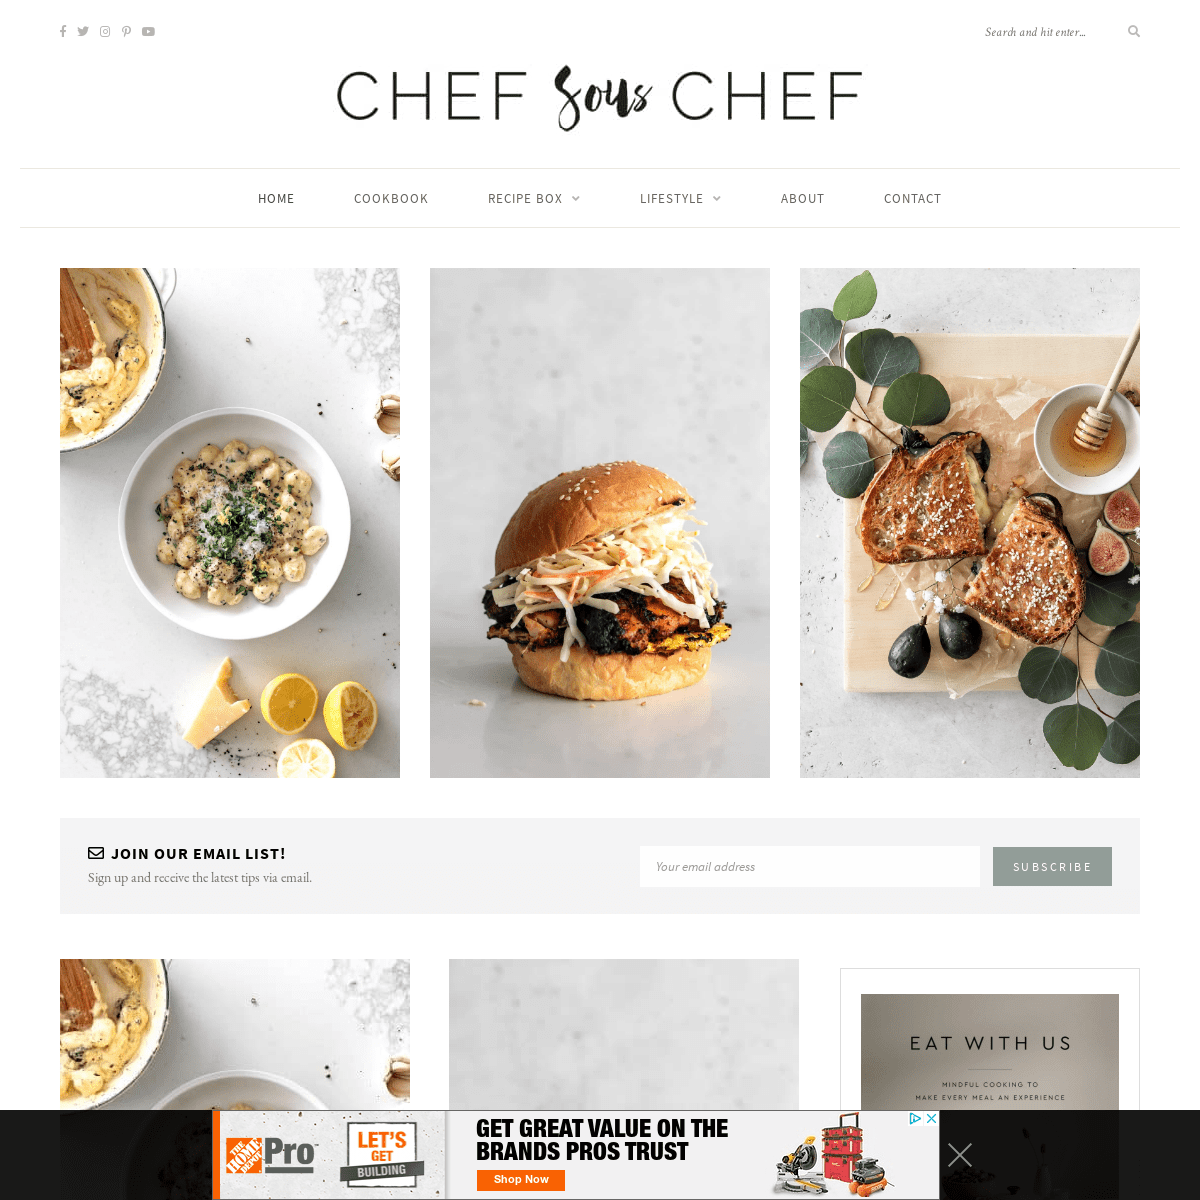 A complete backup of https://chefsouschef.com